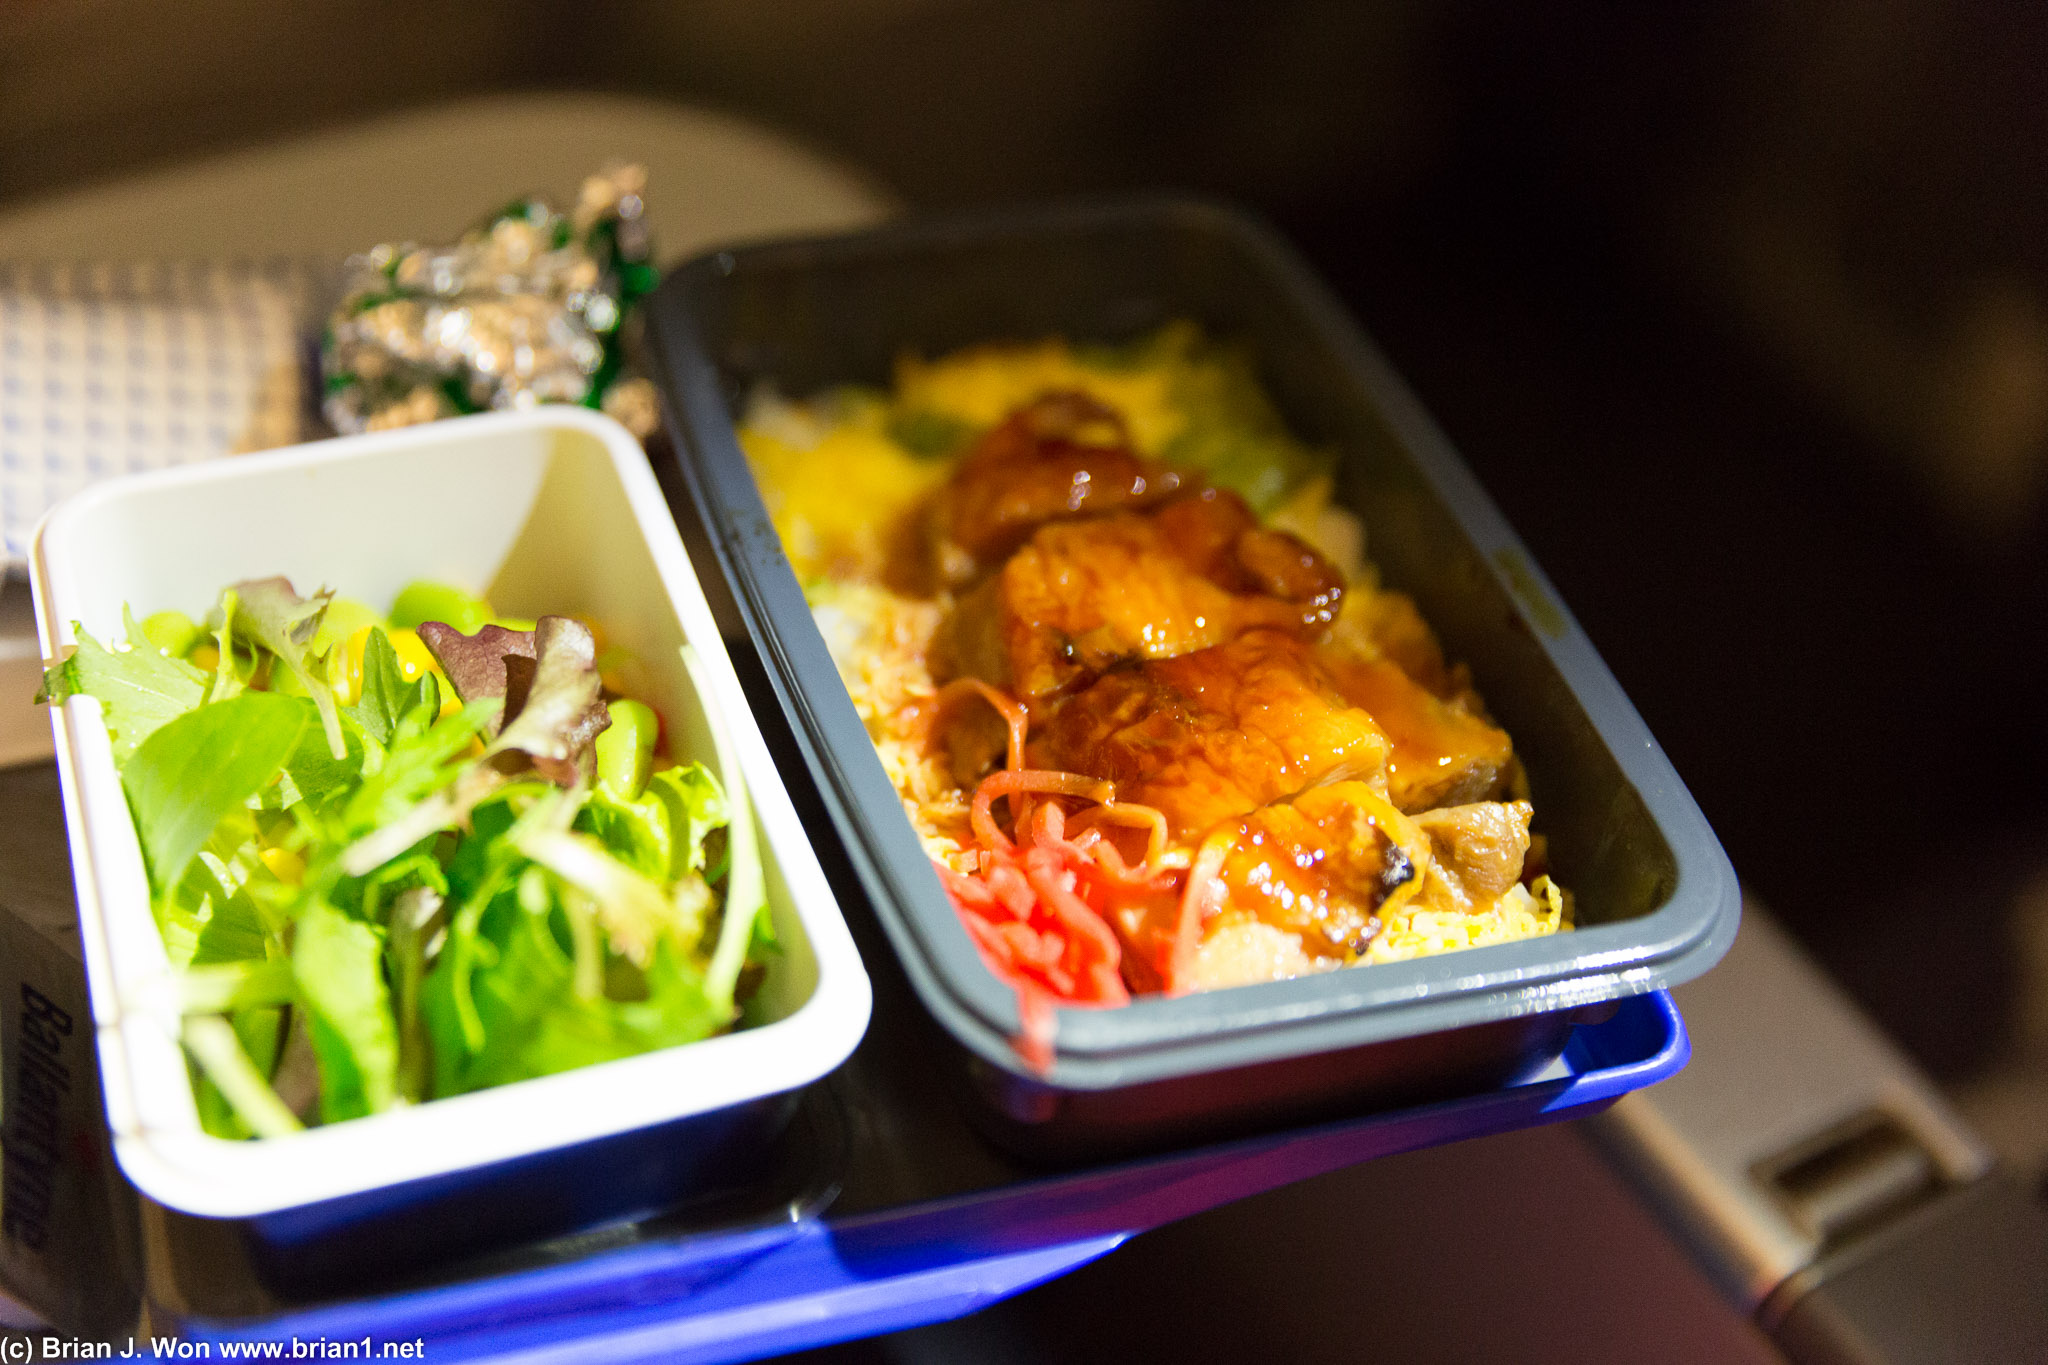 Chicken teriyaki in United Economy Plus. Best to be said? It keeps you alive.